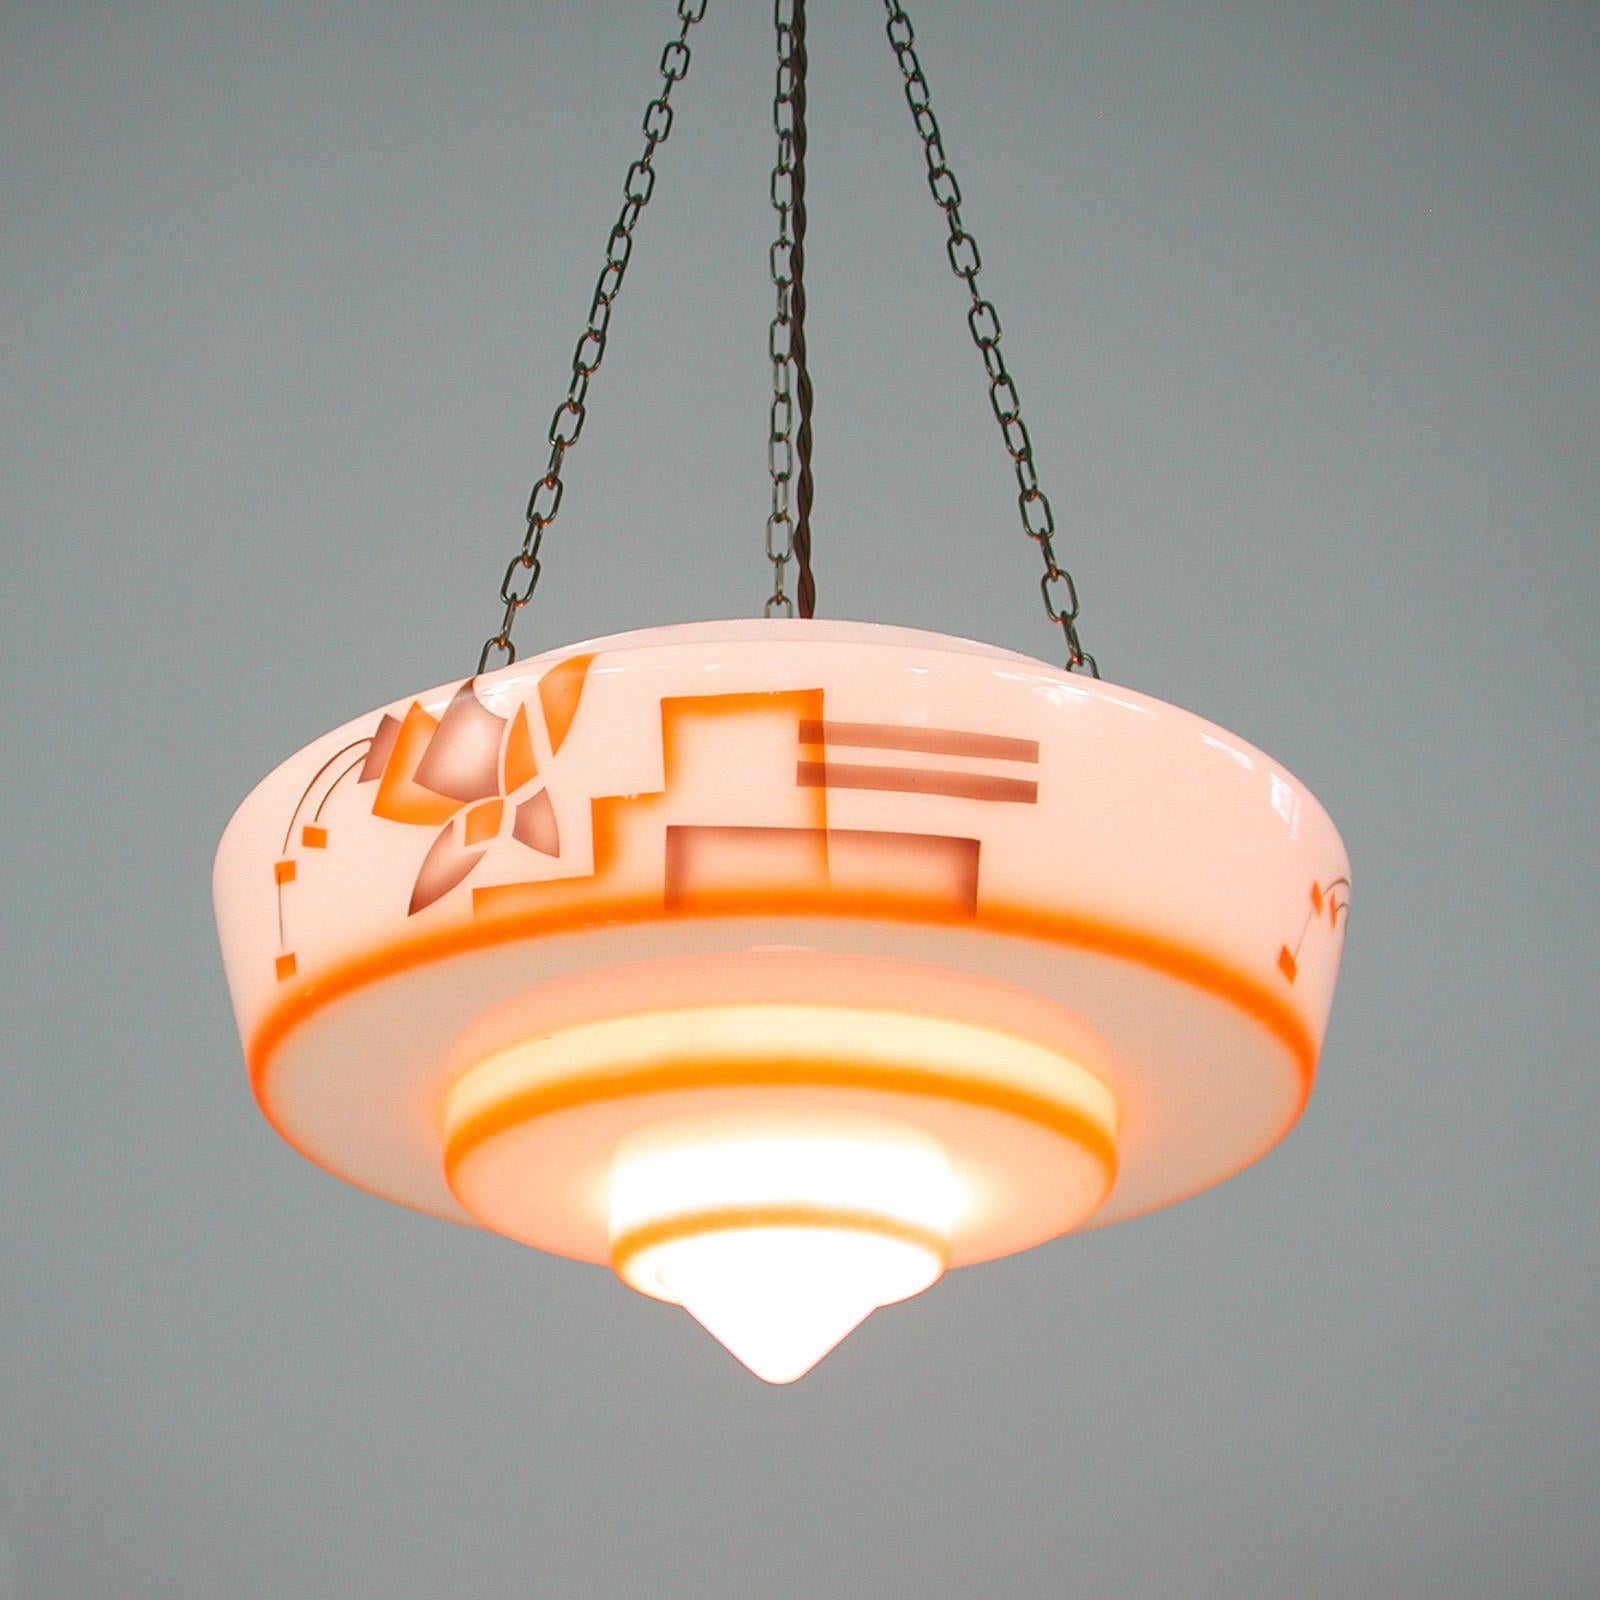 German Art Deco Suspension Light, Enameled Glass and Brass, 1930s For Sale 2